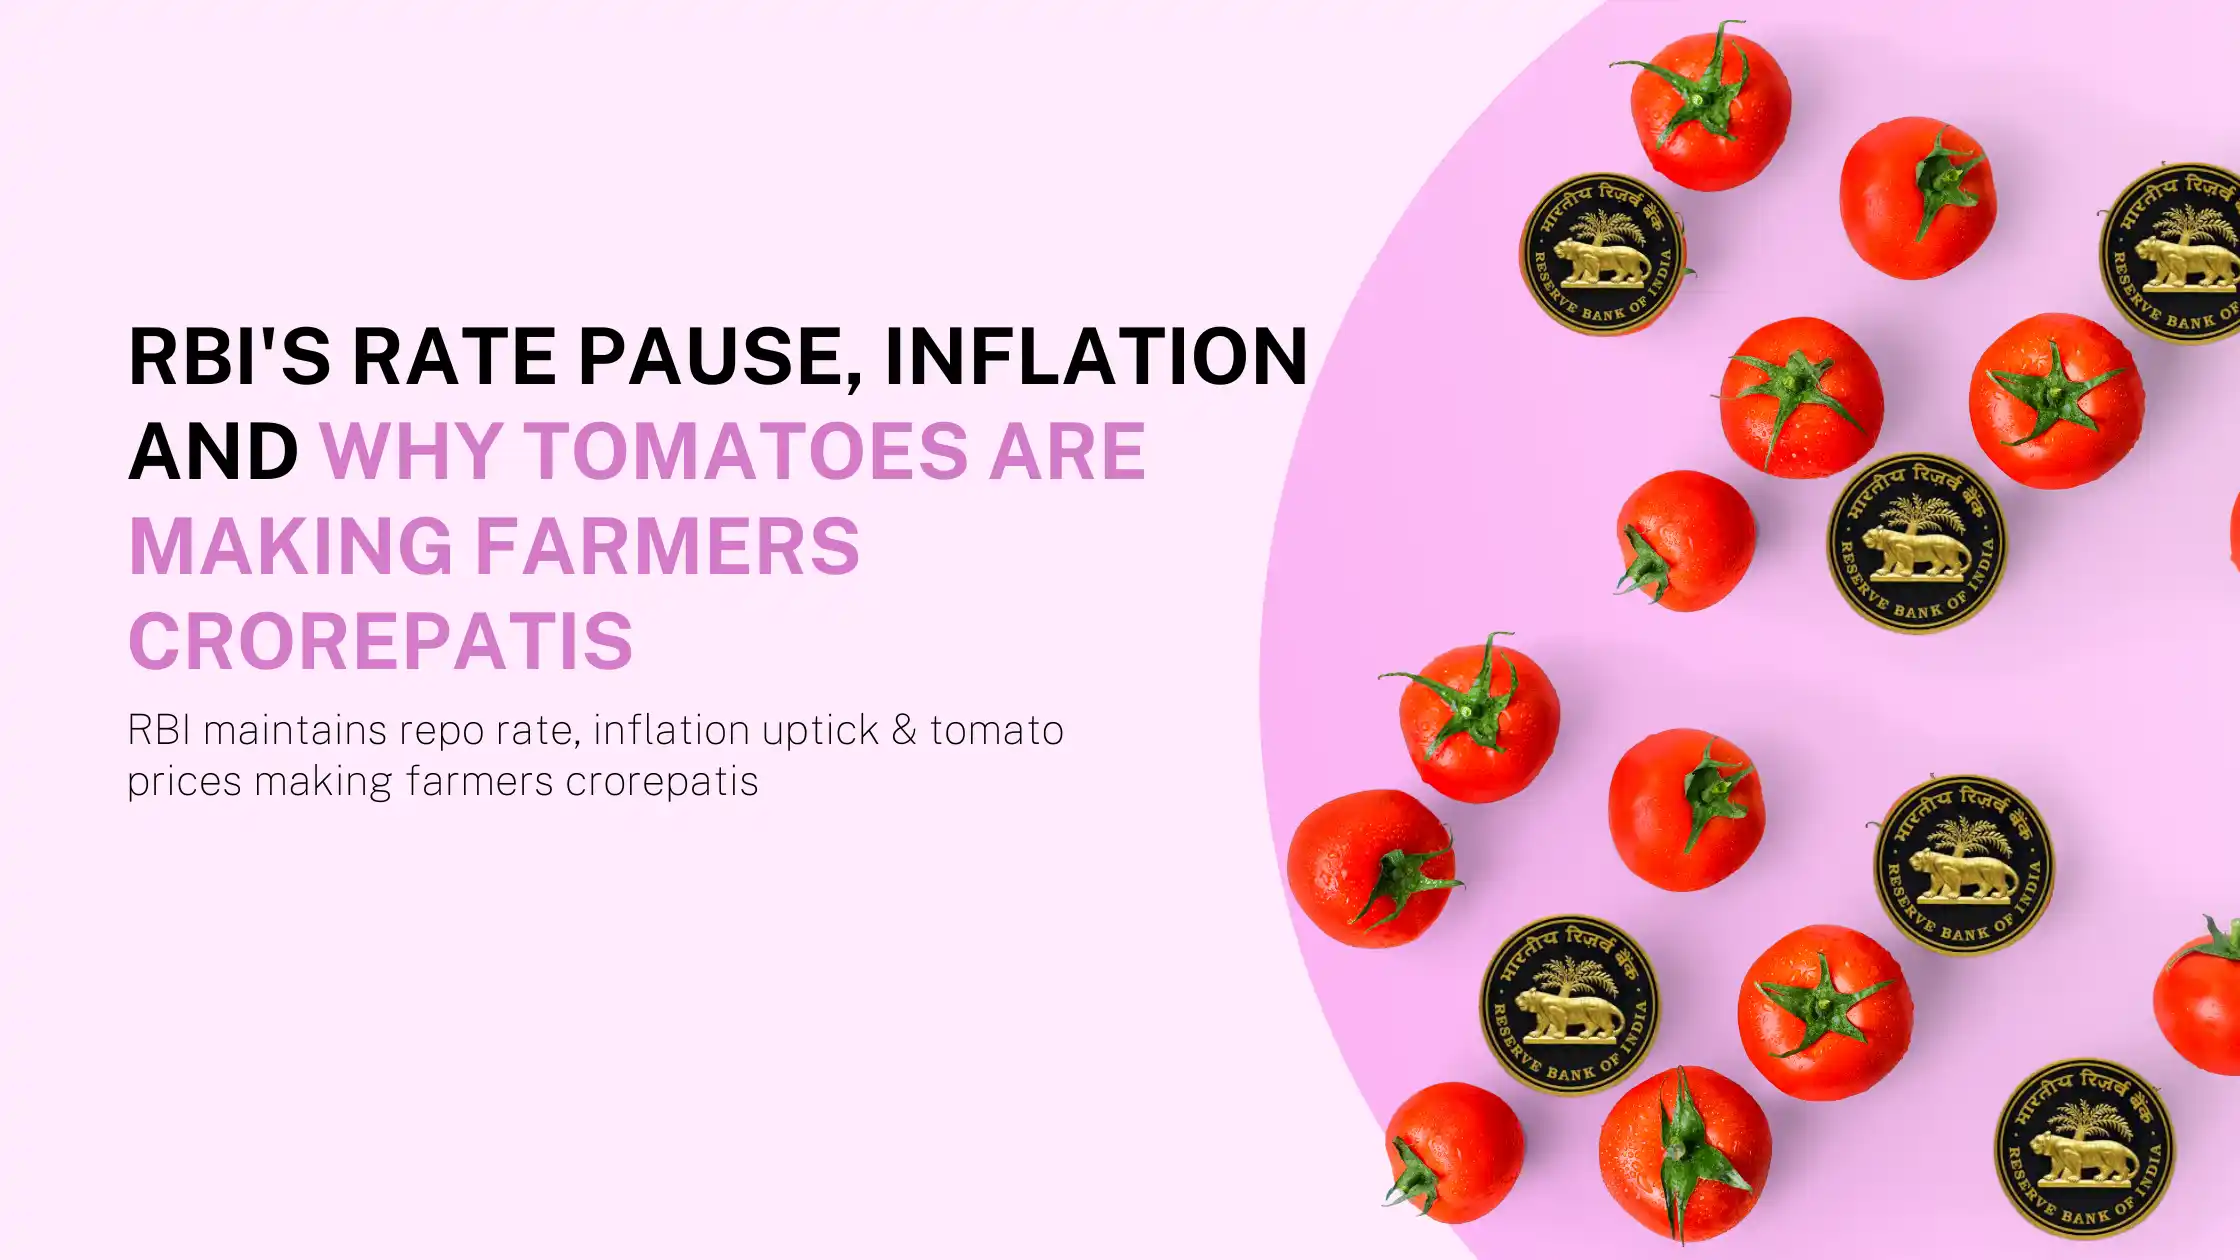 RBI's Rate Pause, Inflation and Why Tomatoes are making Farmers Crorepatis